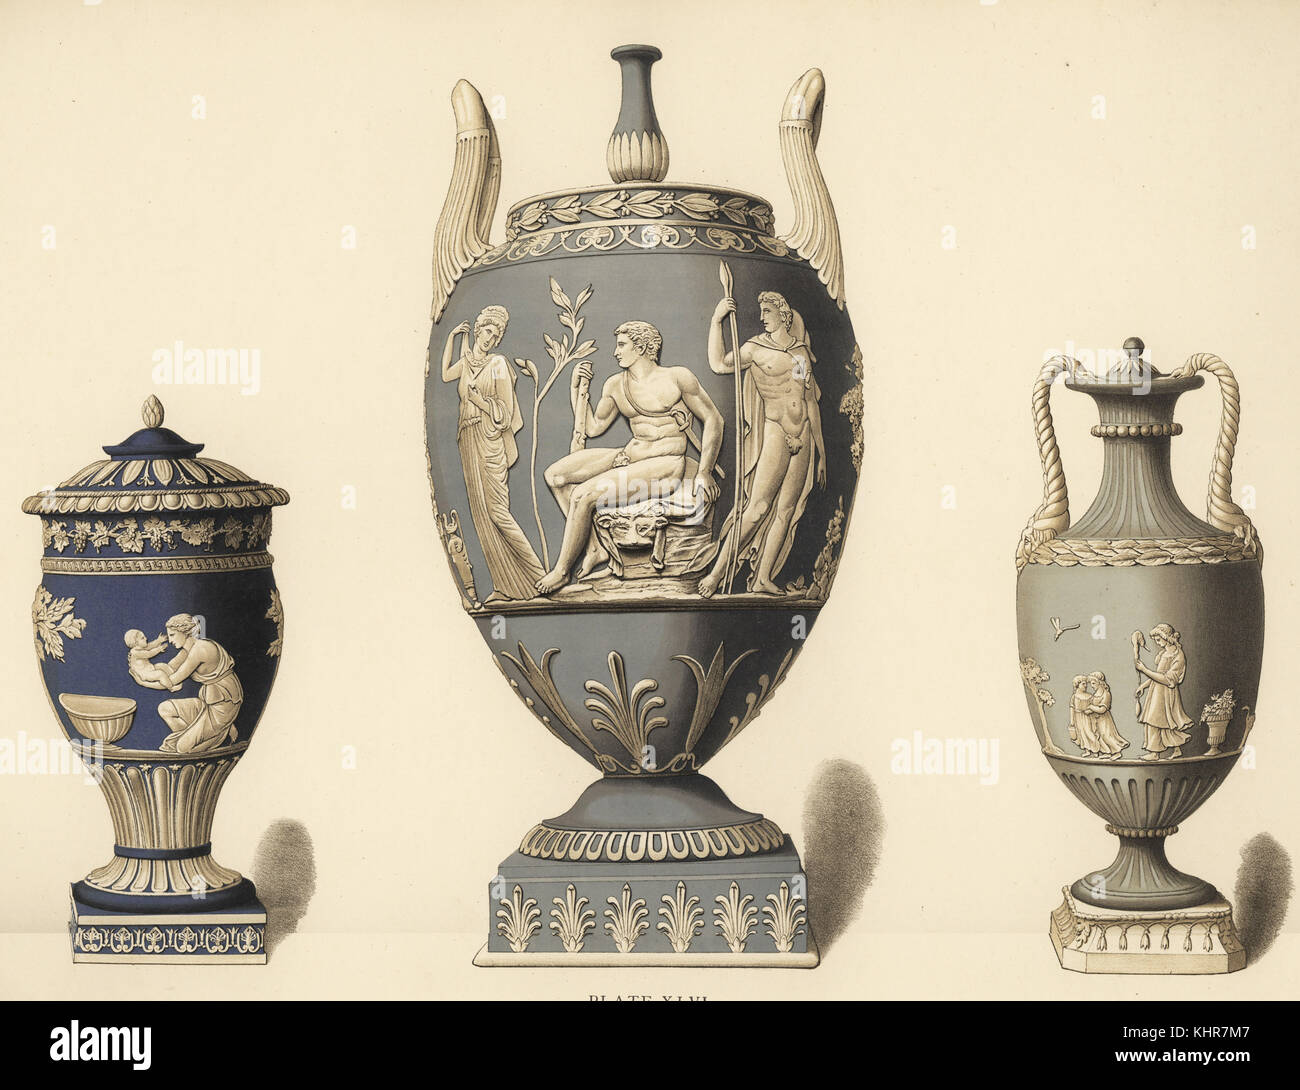 Vase with reliefs of Achilles (L), vase with Hercules in the garden of the Hesperides (C), and vase with reliefs designed by Lady Templeton (R). Chromolithograph by W. Griggs from Frederick Rathbone's Old Wedgwood, the Decorative or Artistic Ceramic Work Produced by Josiah Wedgwood, Quaritch, London, 1898. Stock Photo